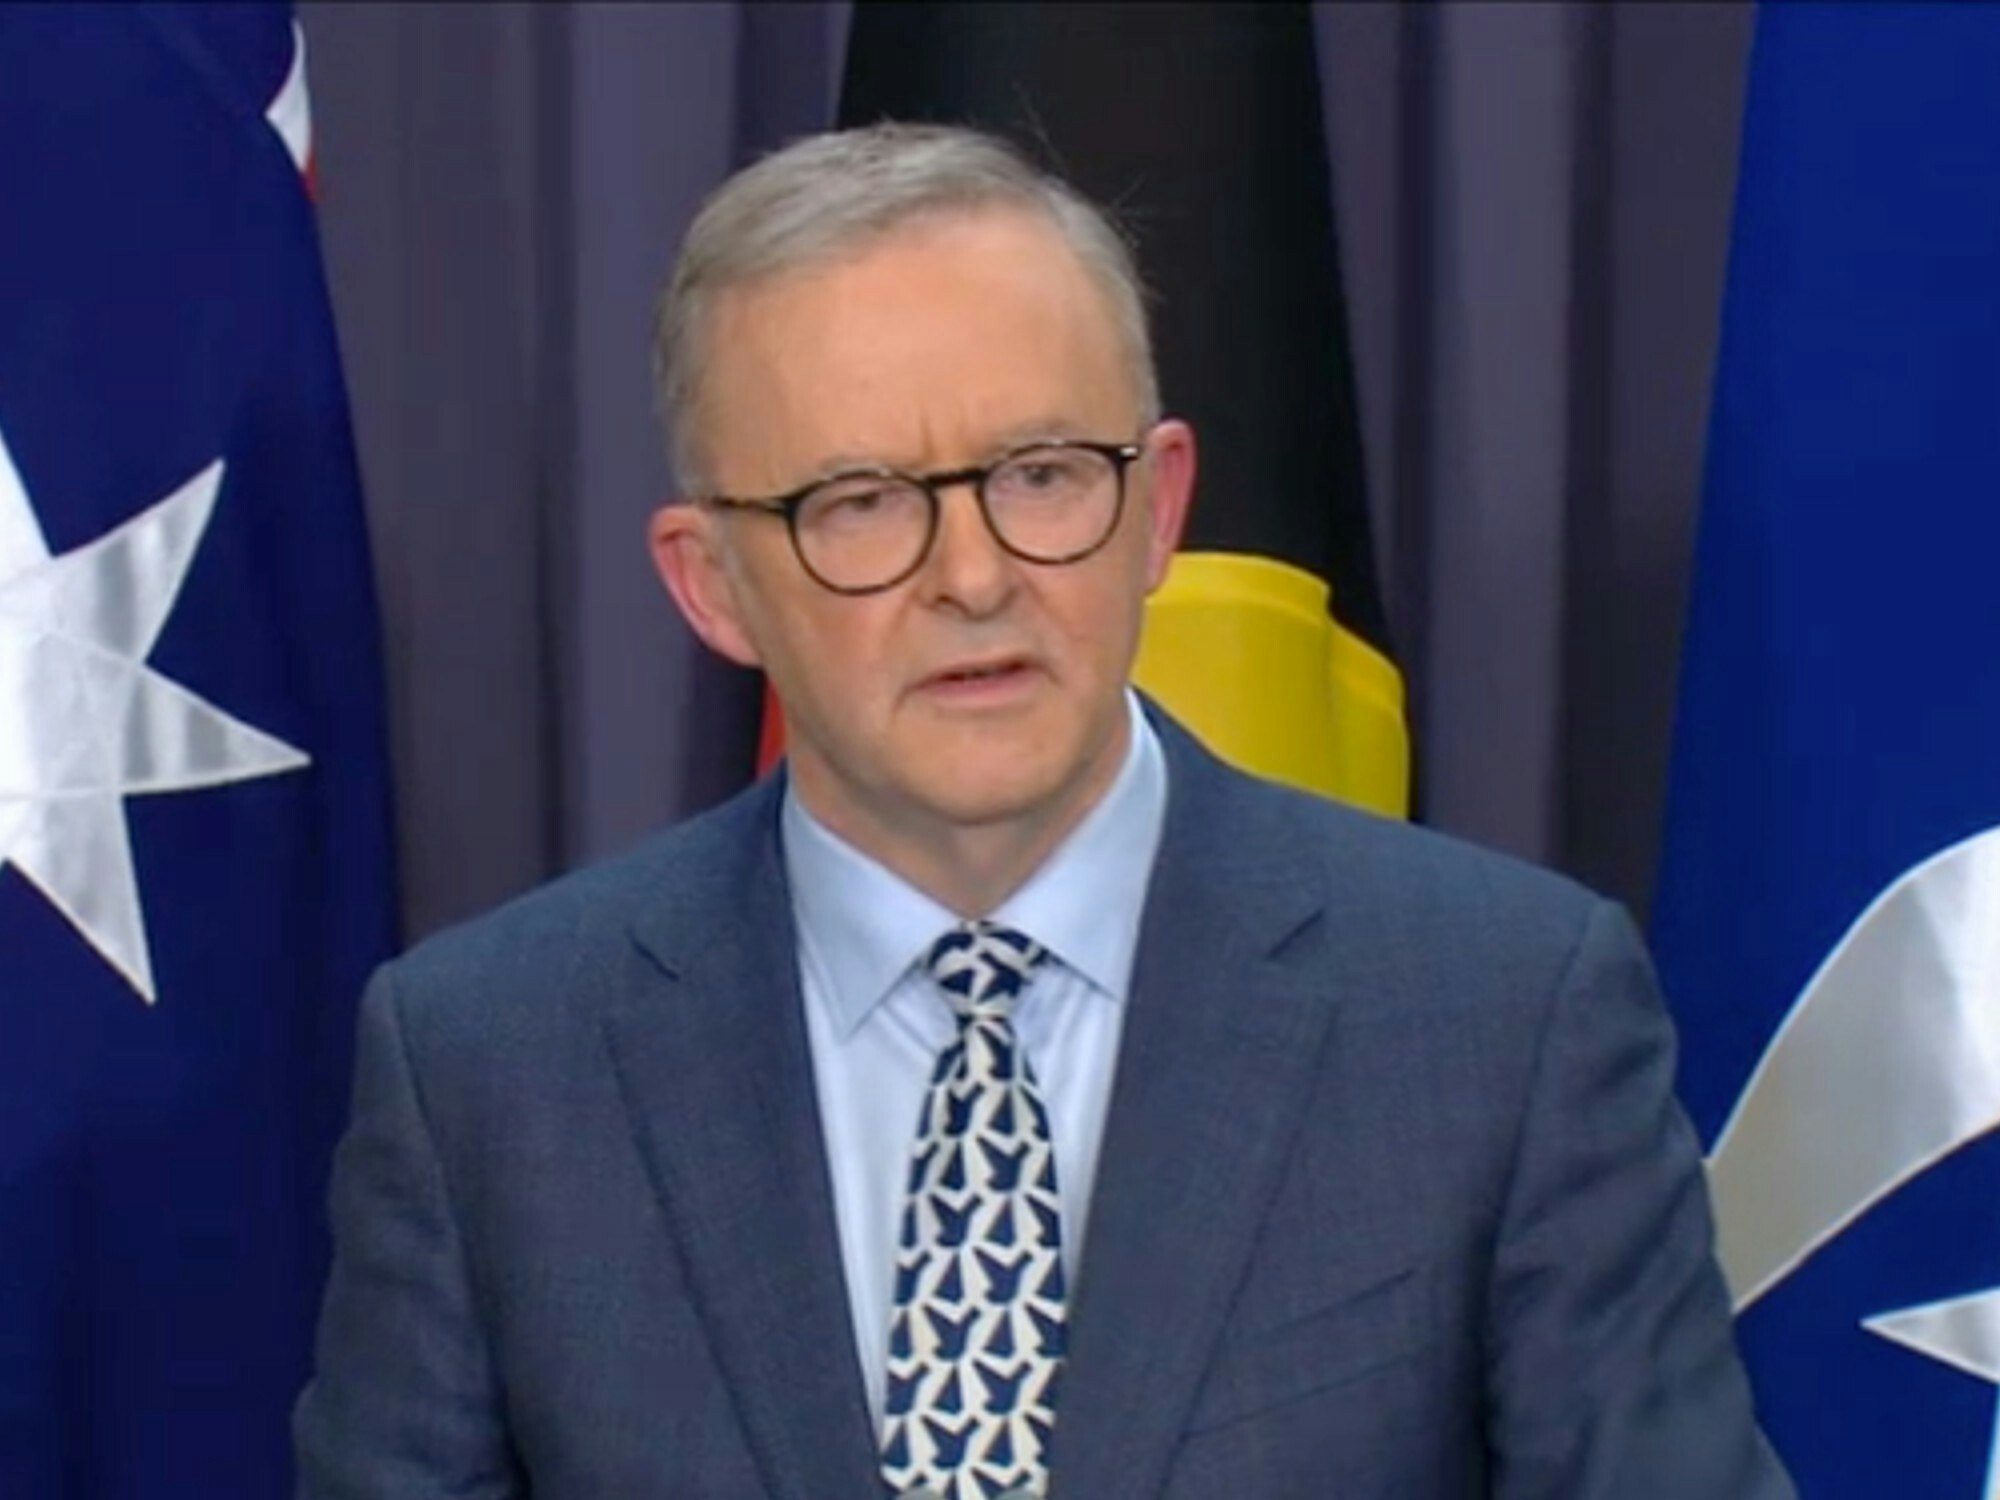 <p>Prime Minister Anthony Albanese announced his Ministry last night, with Bill Shorten appointed Minister for the NDIS. [Source: Parliament live]</p>
